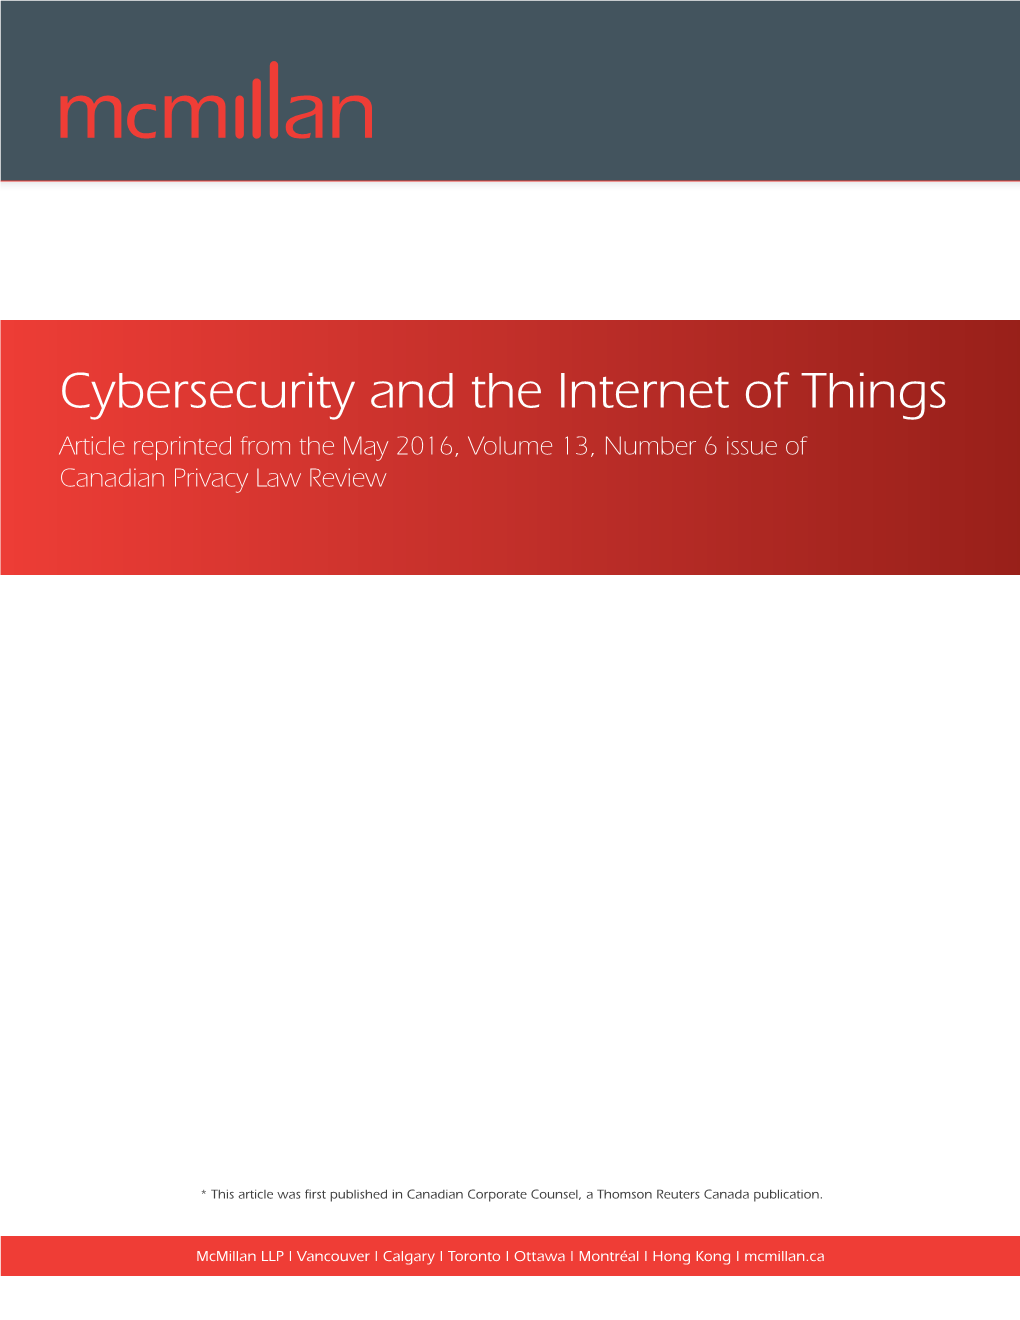 Cybersecurity and the Internet of Things Article Reprinted from the May 2016, Volume 13, Number 6 Issue of Canadian Privacy Law Review